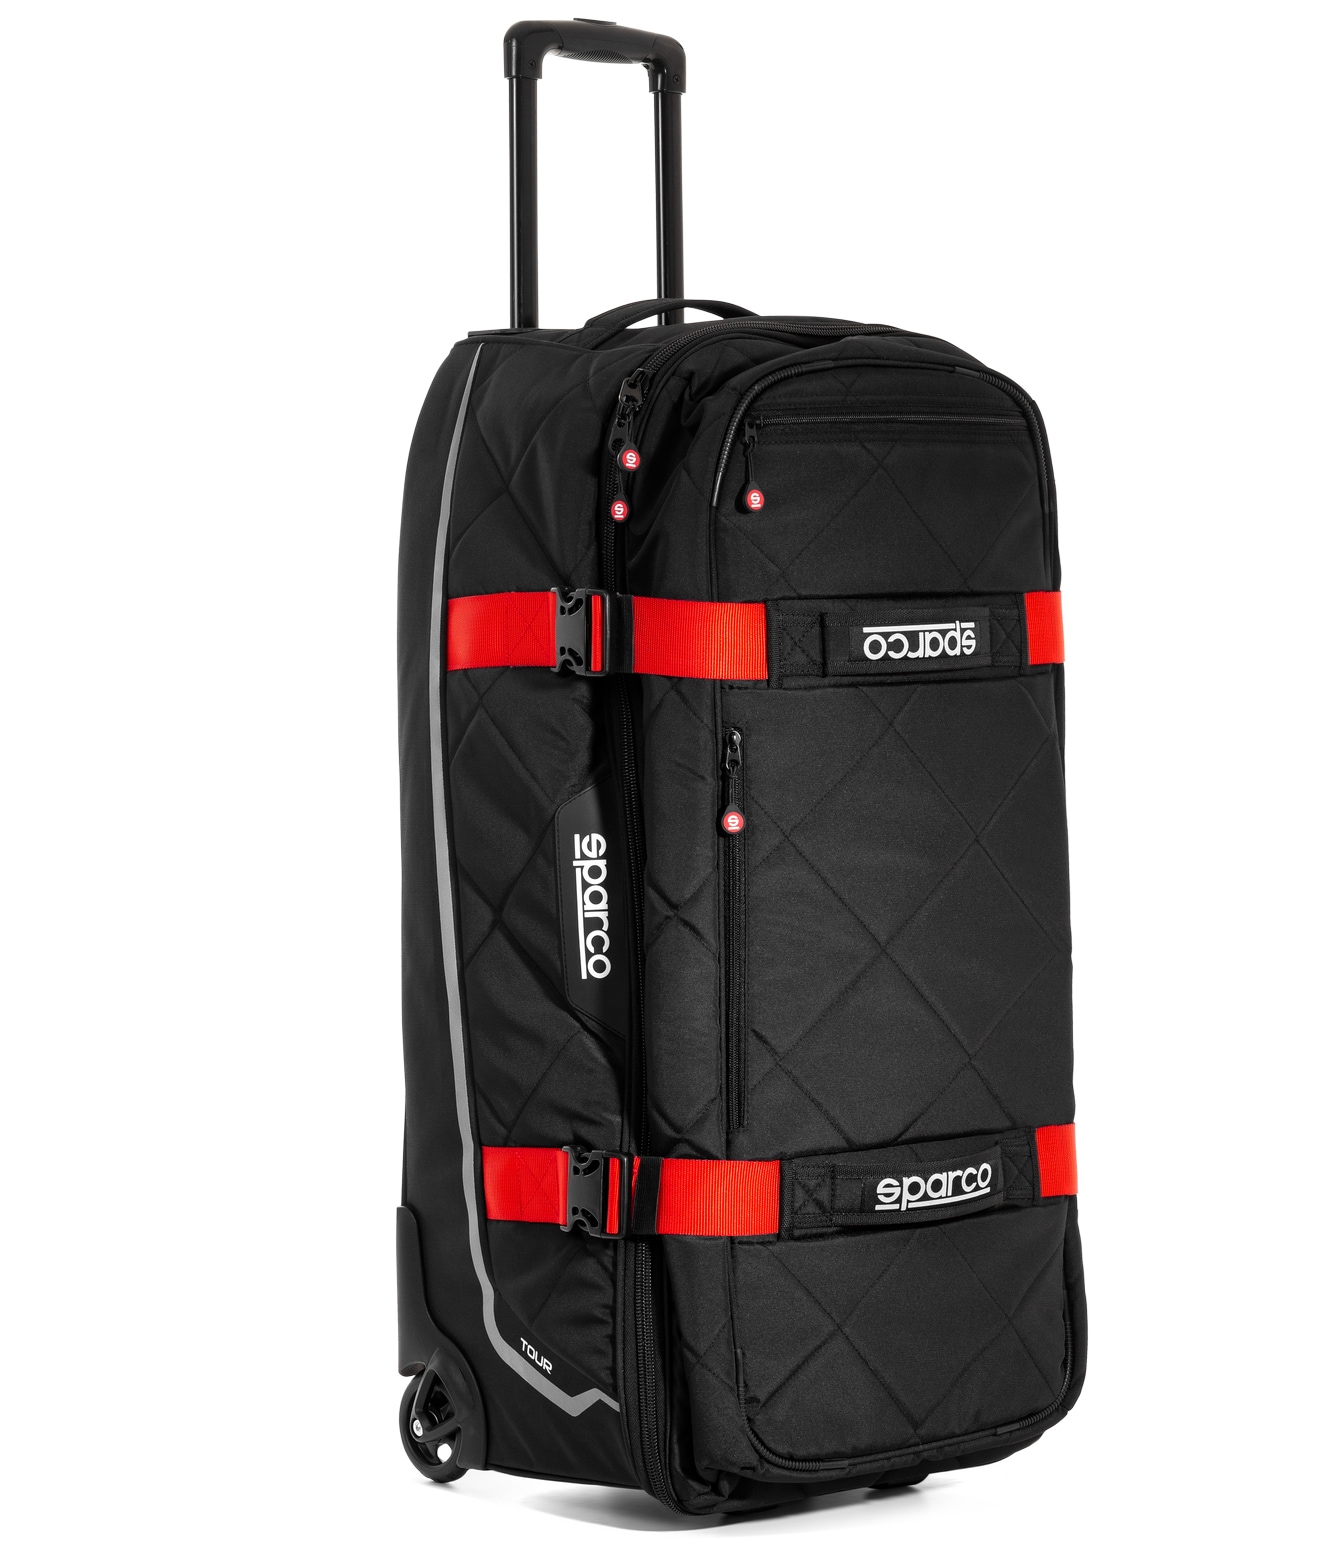 Trolley bag Sparco Tour Black Red